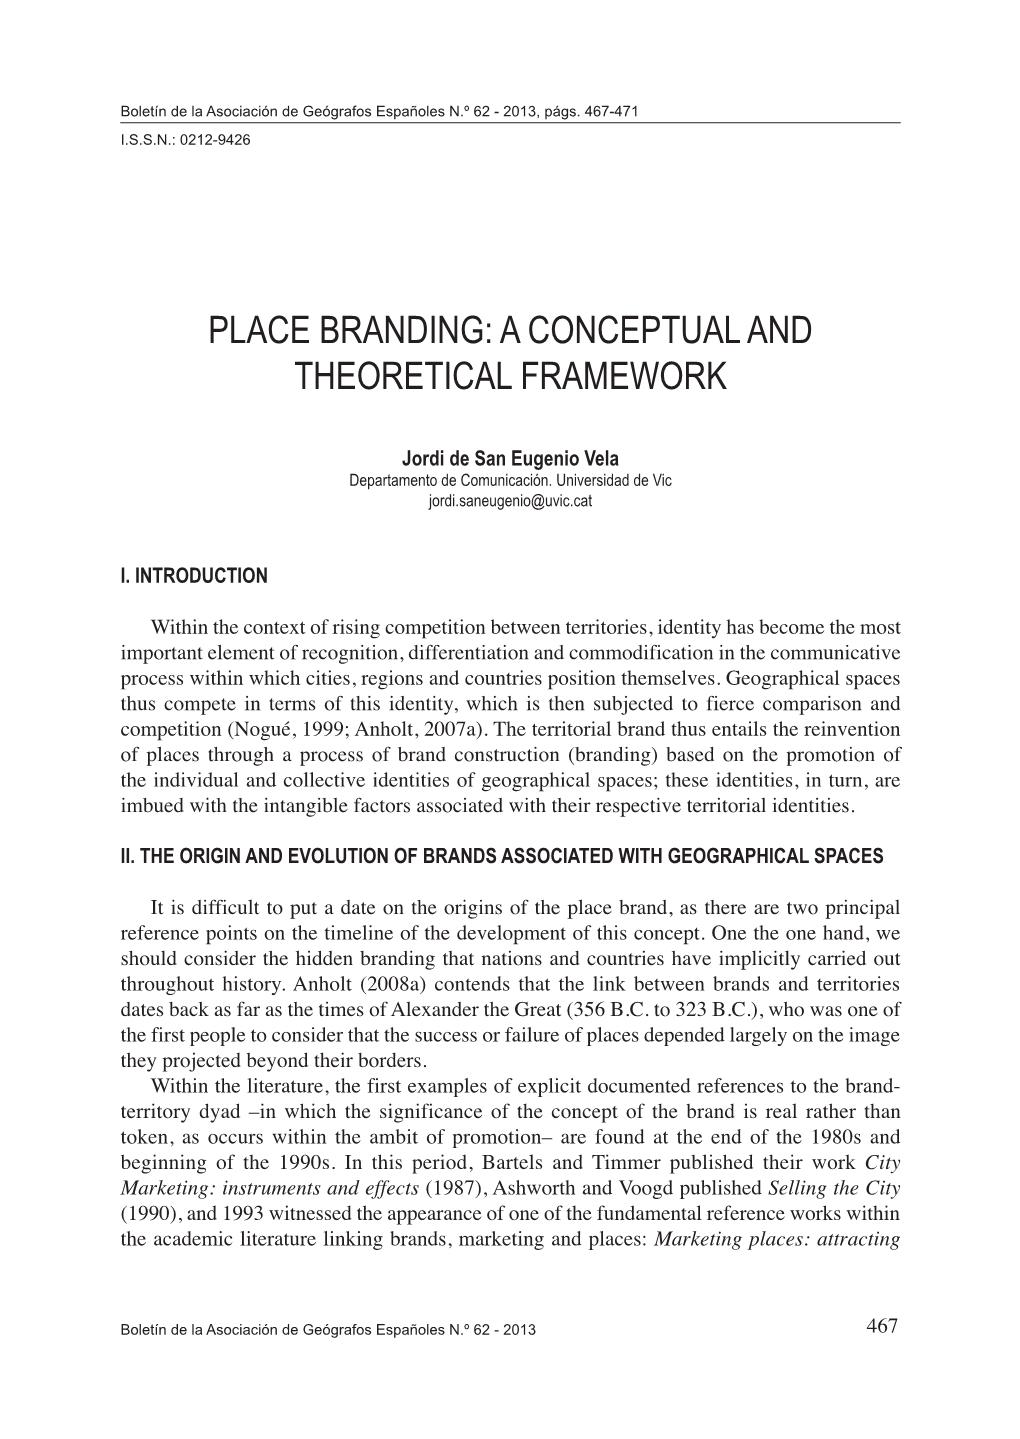 Place Branding: a Conceptual and Theoretical Framework